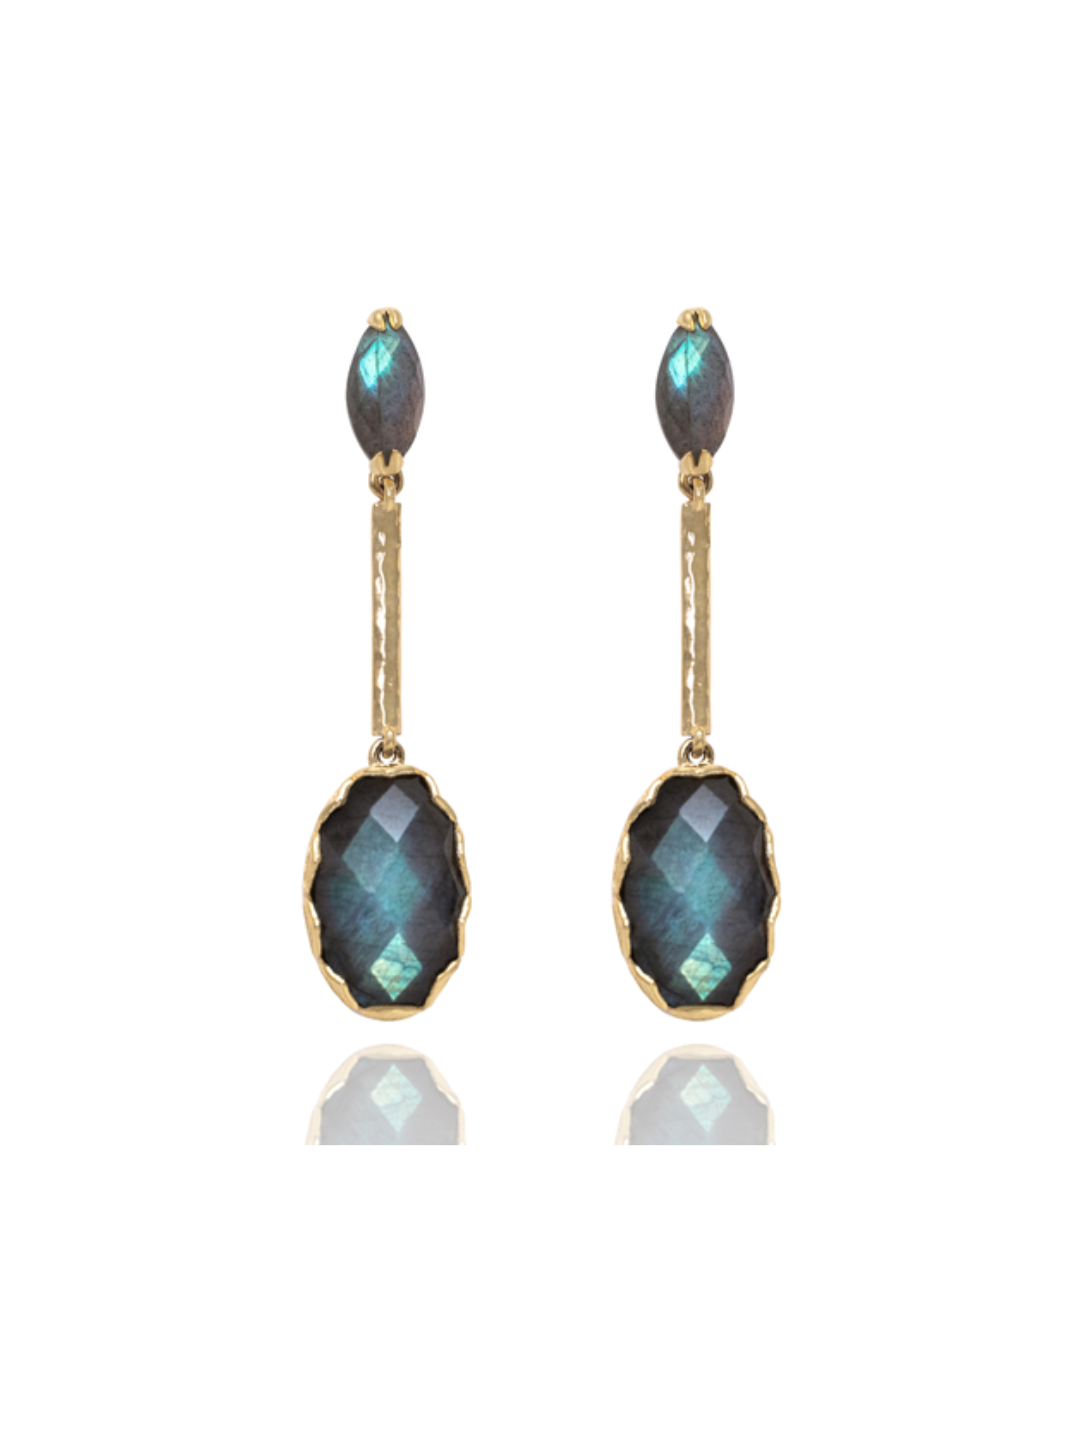 Featuring labradorite, a gemstone that is as unique as you. You’ll love the greens and blues that reflect off this natural semi precious stone. Each stone carefully selected & hand cut just for you.  Ethical sustainable jewelry shop eco-friendly fashion